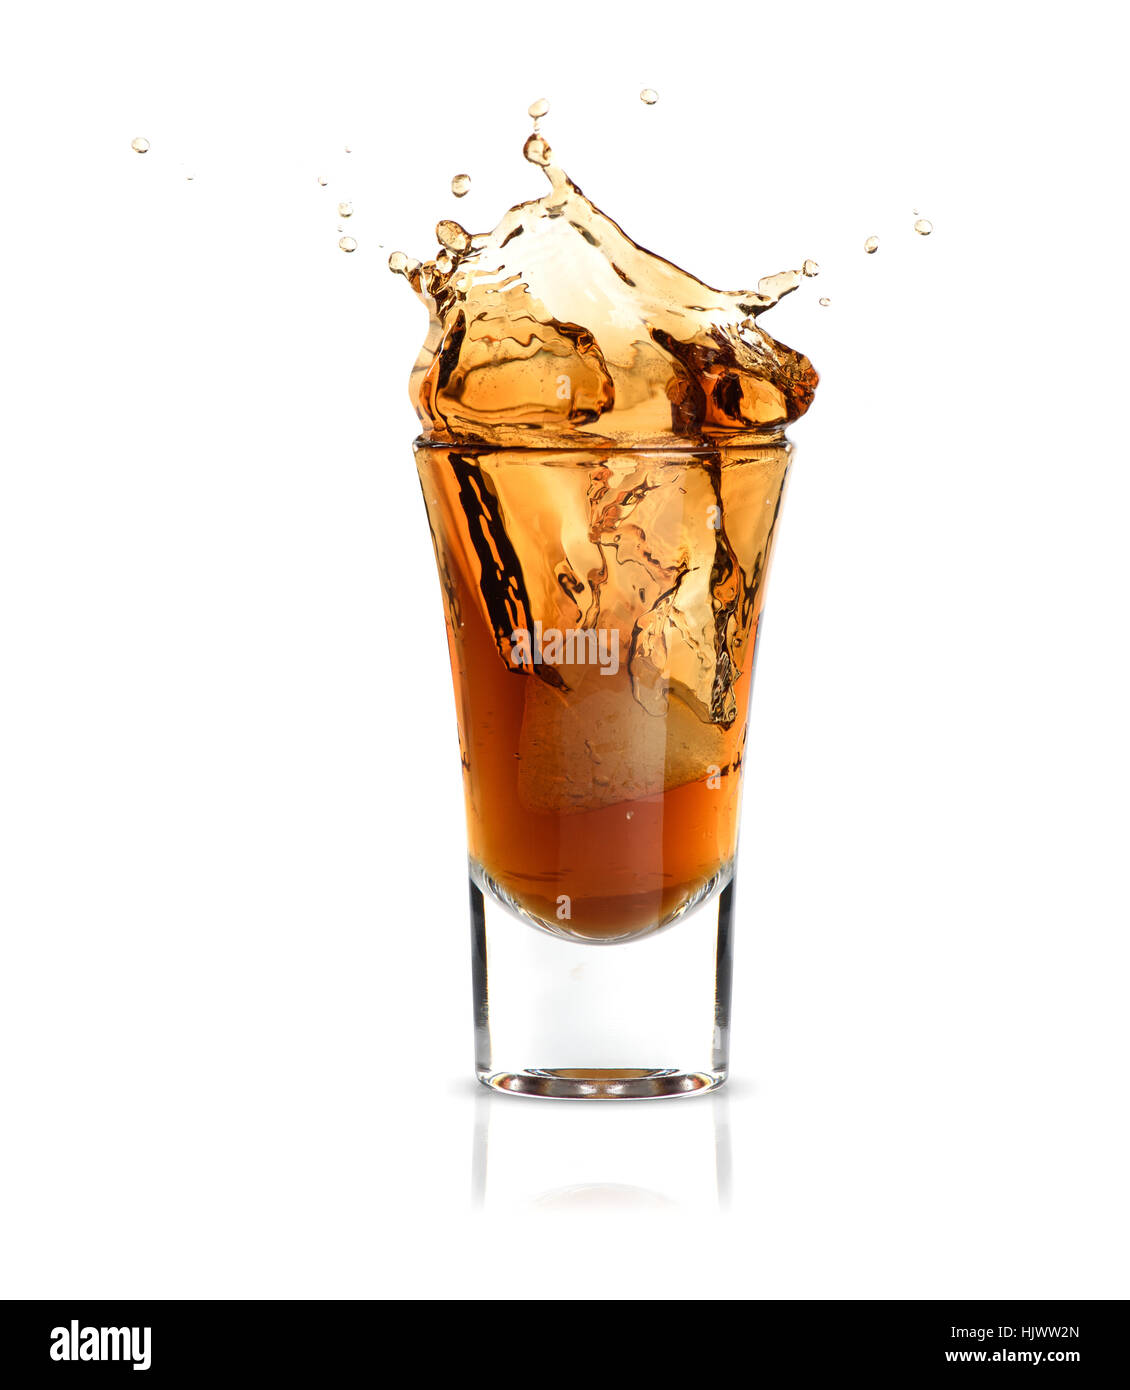 https://c8.alamy.com/comp/HJWW2N/whiskey-in-a-glass-with-splash-isolated-on-white-background-HJWW2N.jpg